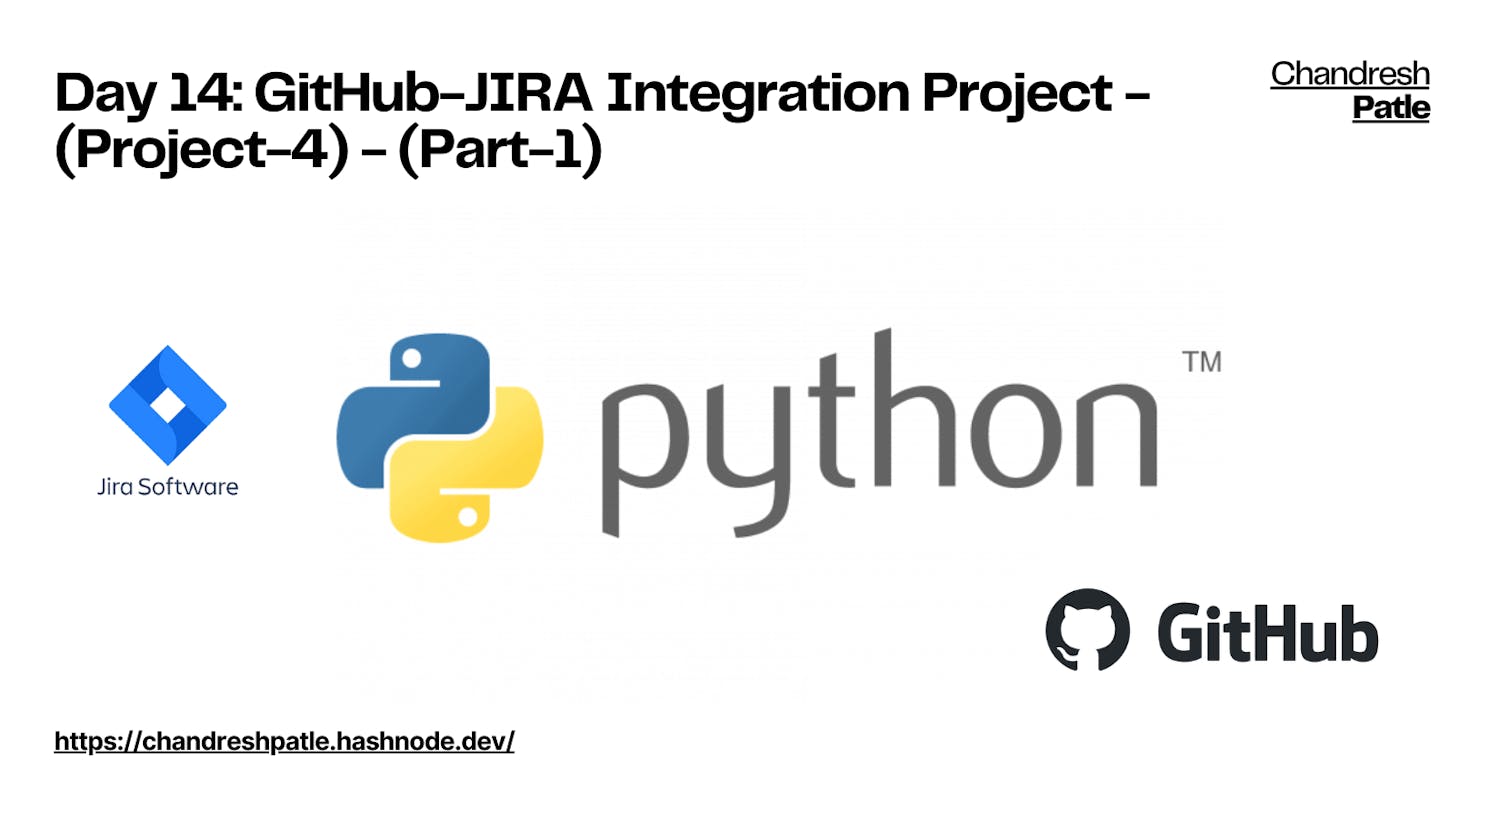 Day 14: GitHub-JIRA Integration Project - (Project-4) - (Part-1)